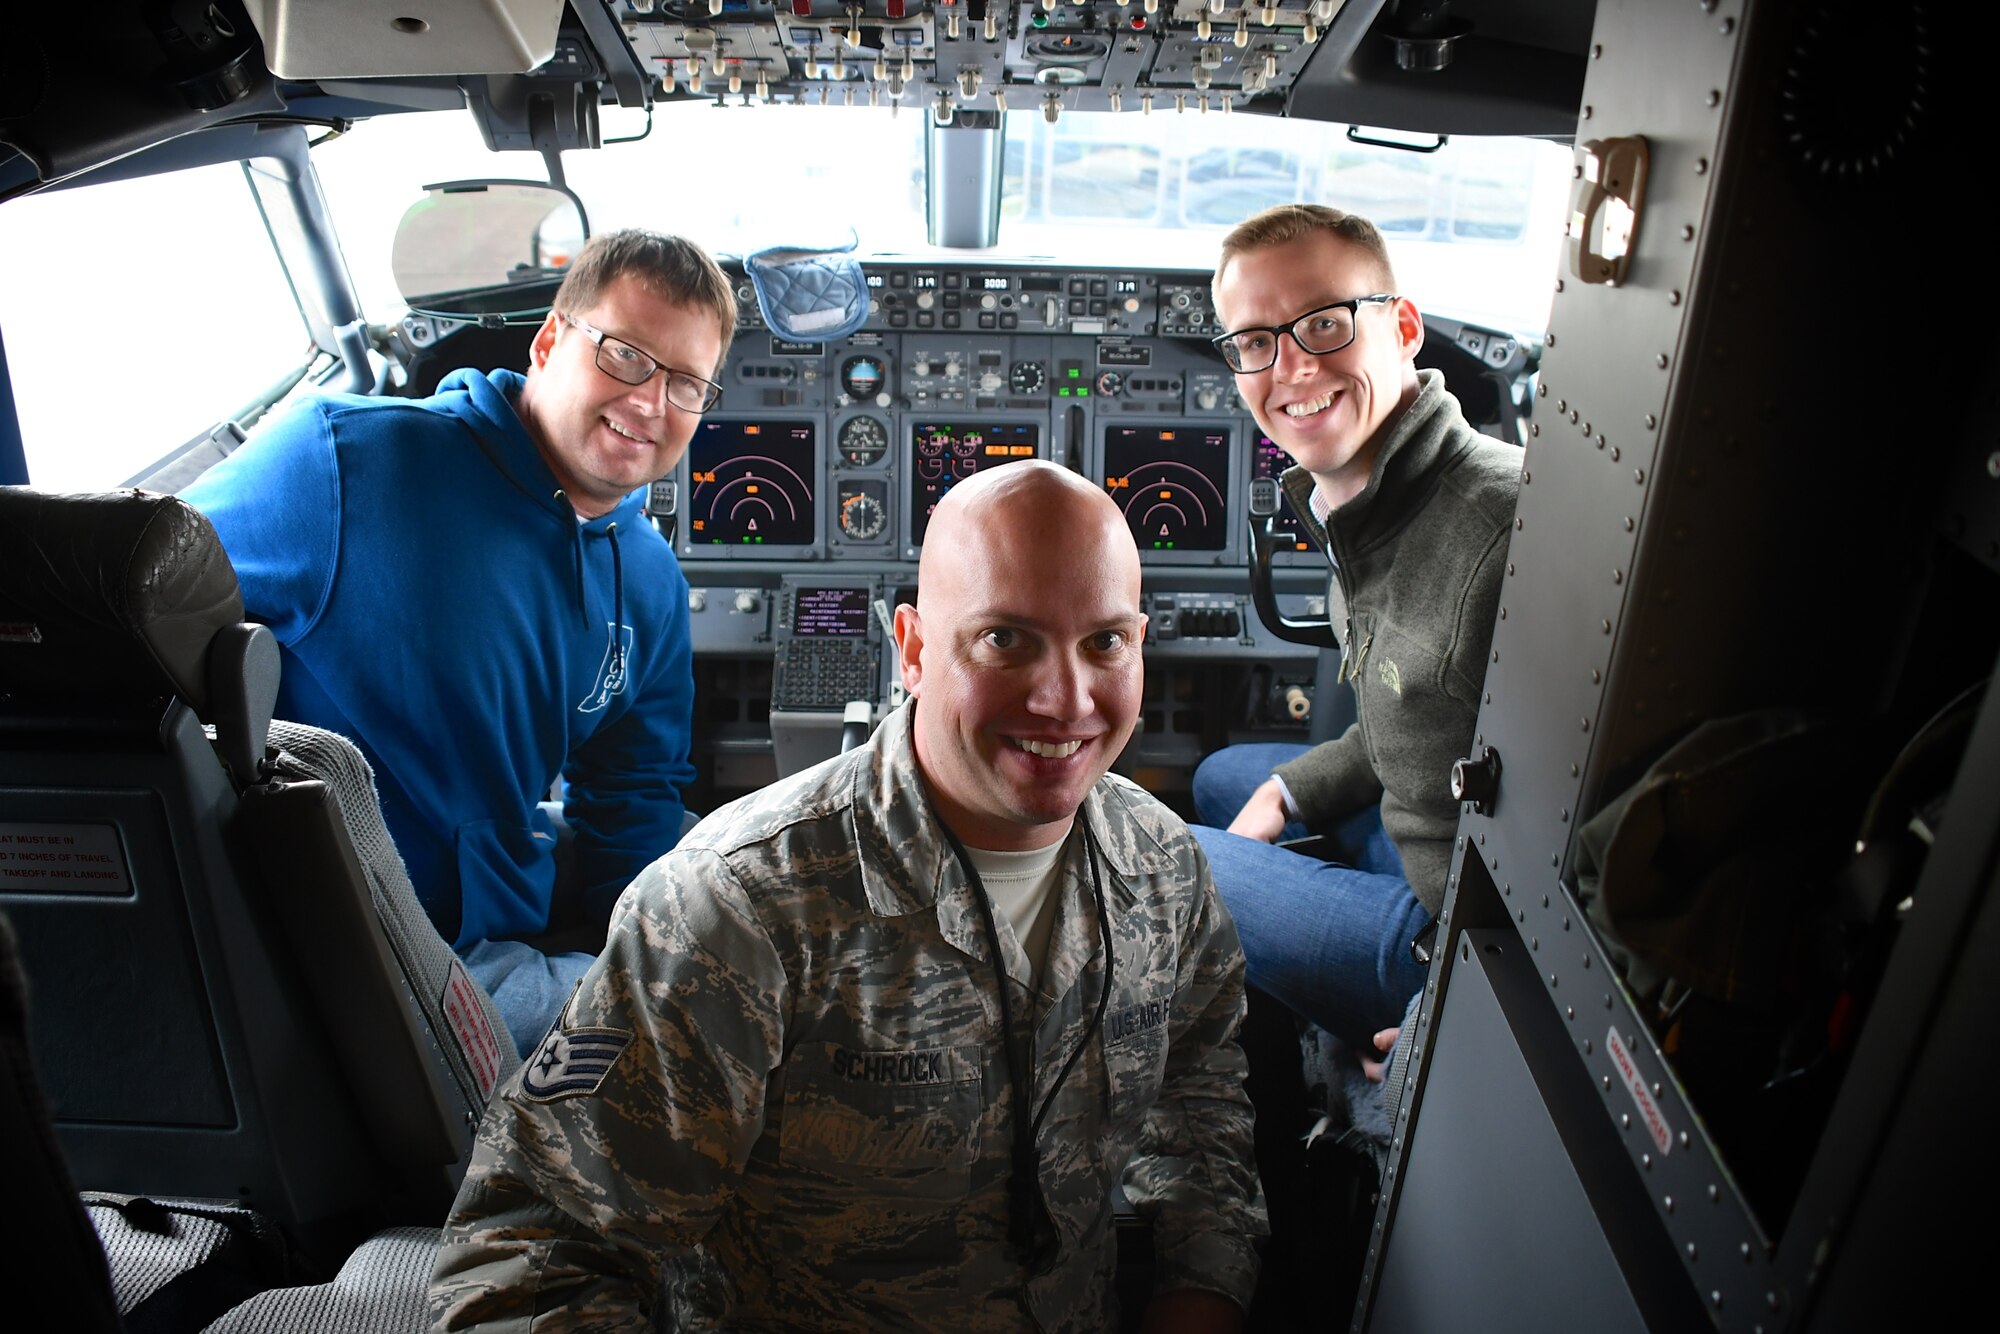 Employers sit inside the cockpit of a C-40 plane and talk to the 932nd Maintenance Group's Staff Sgt. Jeremy Schrock, part of the maintenance crew taking care of the aircraft during the annual Boss Day visitation event hosted by the 932nd Airlift Wing October 13, 2018, at Scott Air Force Base, Illinois. Civilian employers also saw medical reservists training, security forces and equipment demos from 932nd Explosive Ordnance Disposal (EOD) and met civil engineers and firefighters. The 932nd AW provides world-class, reliable airlift for the nation's civilian and military leaders.(U.S. Air Force photo by Lt. Col. Stan Paregien)